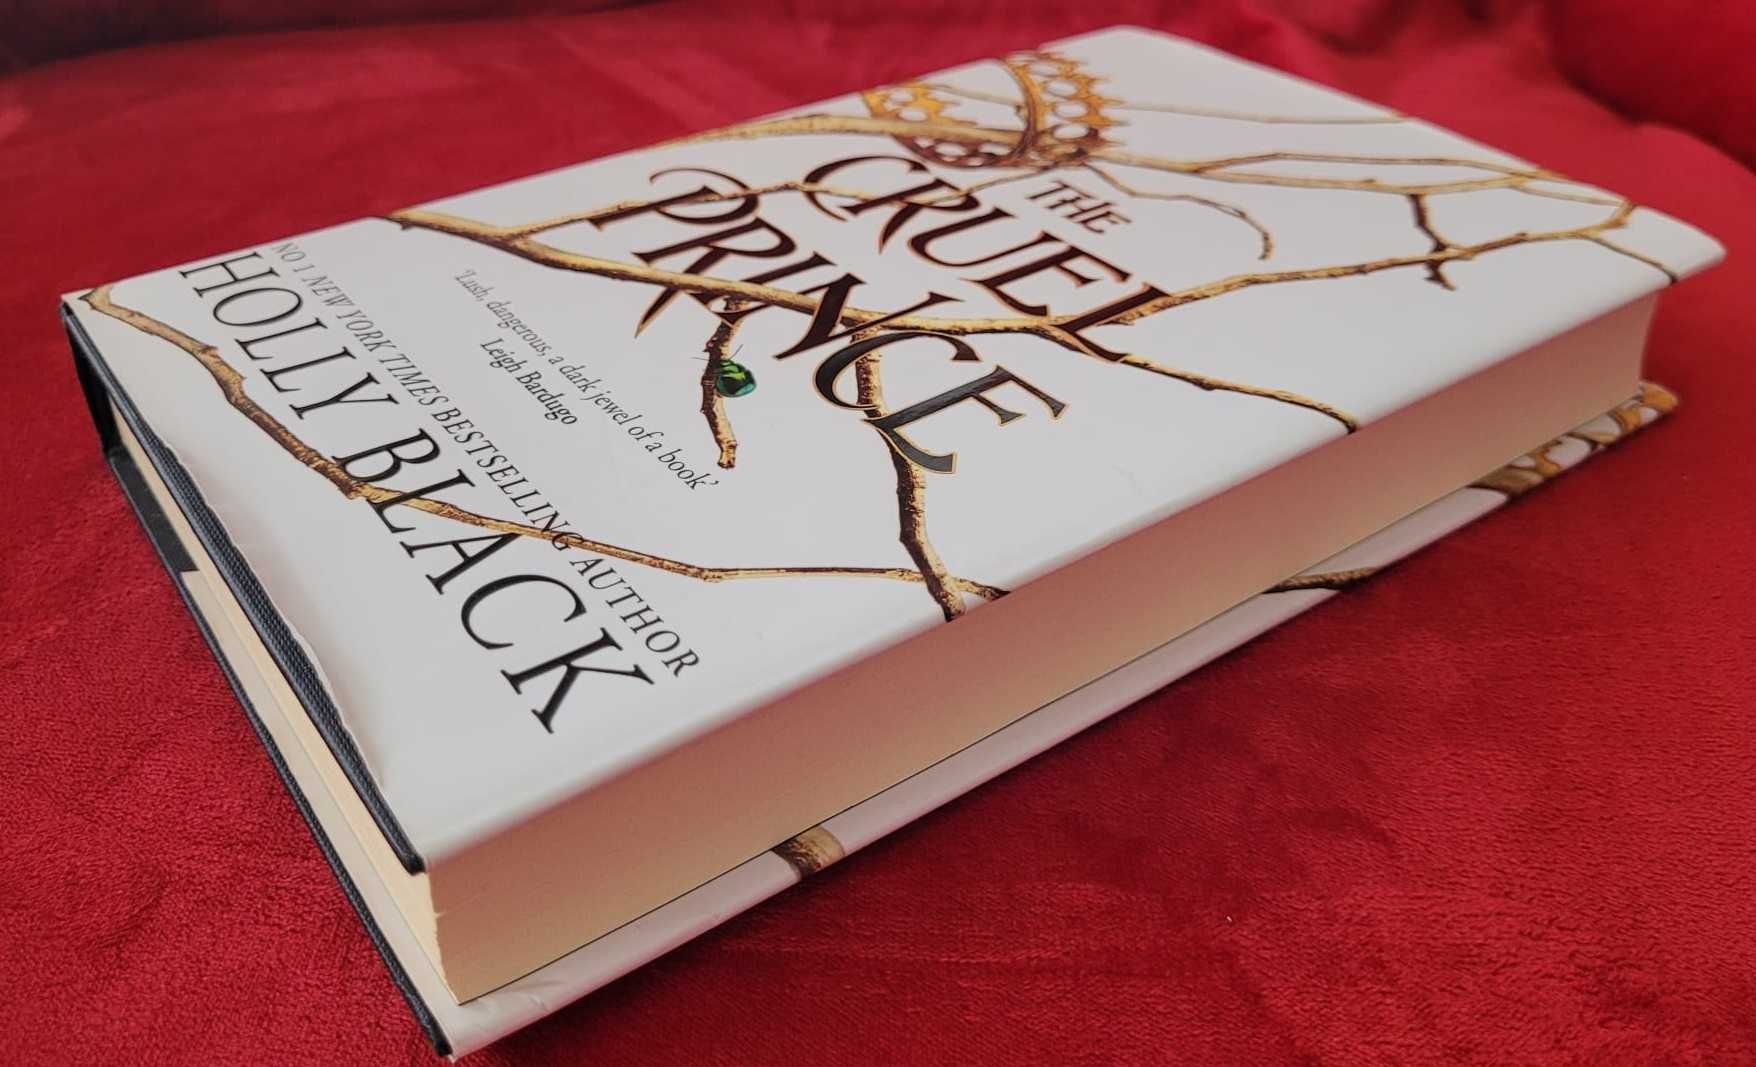 The Cruel Prince - Holly Black (The Folk of the Air #1)